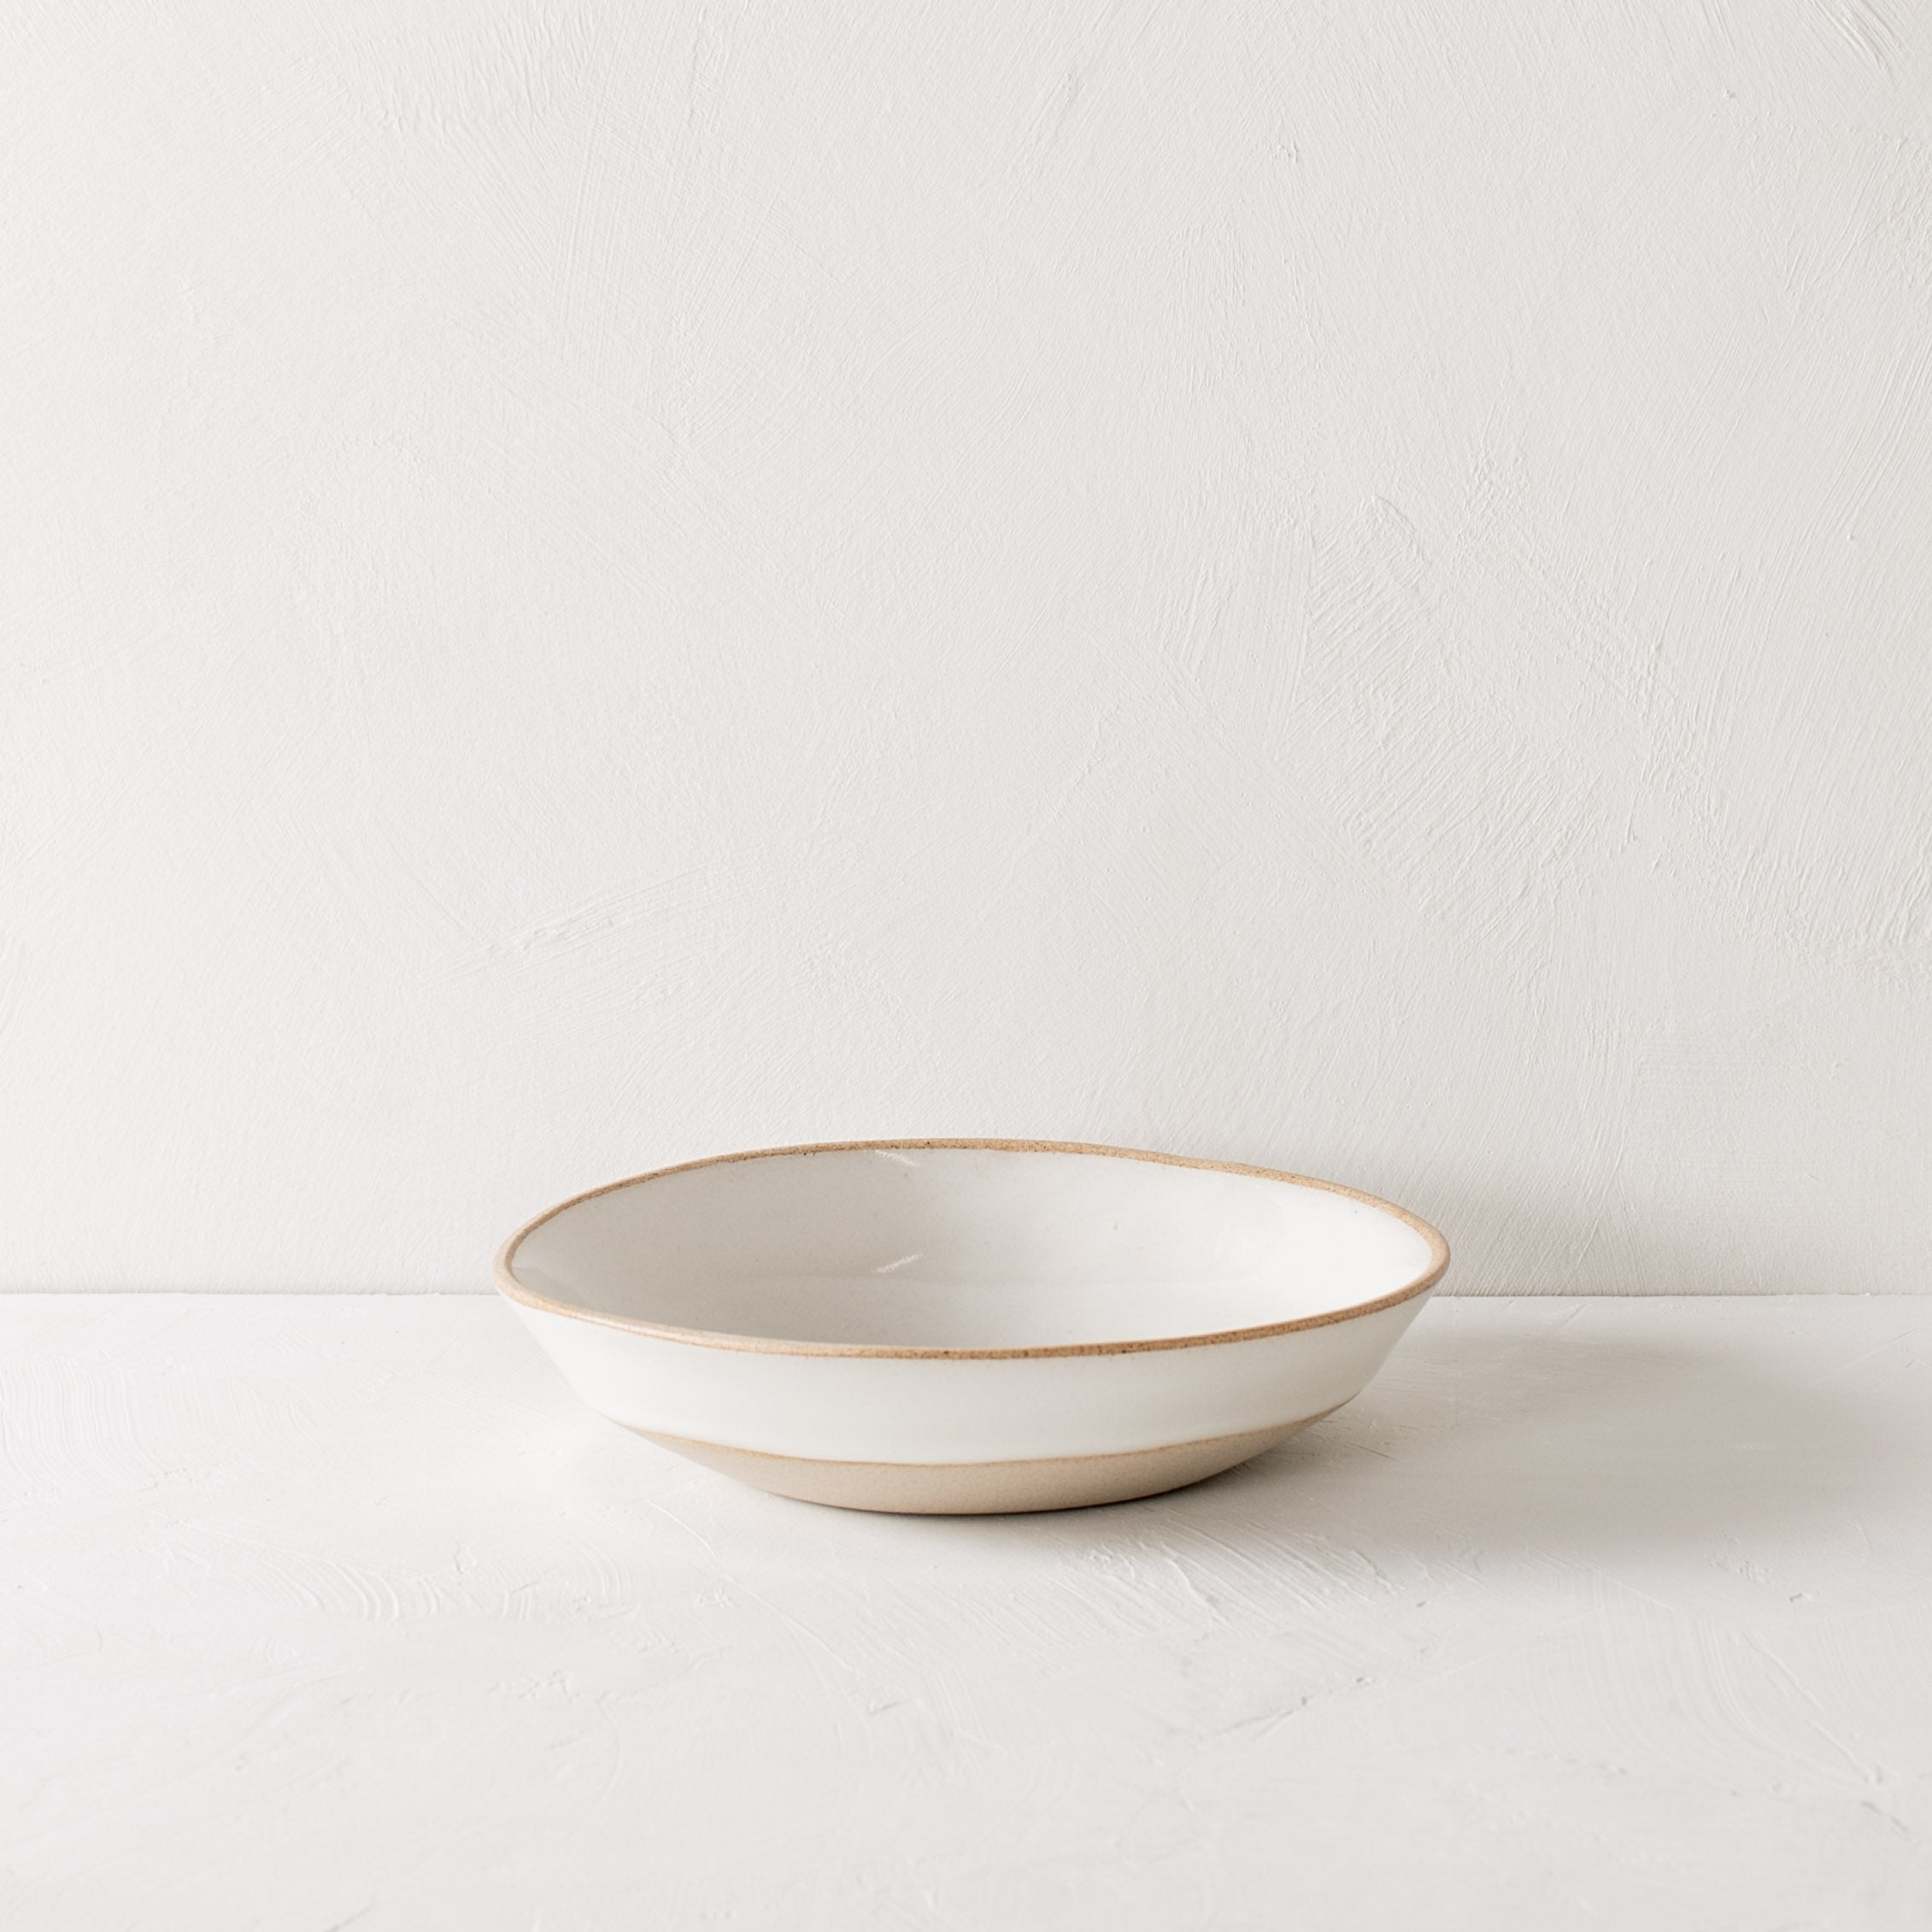 Minimal white pasta bowl. The pasta bowl has exposed stoneware rims and extended base. Handmade ceramic pasta bowl, designed and sold by Convivial Production, Kansas City ceramics.